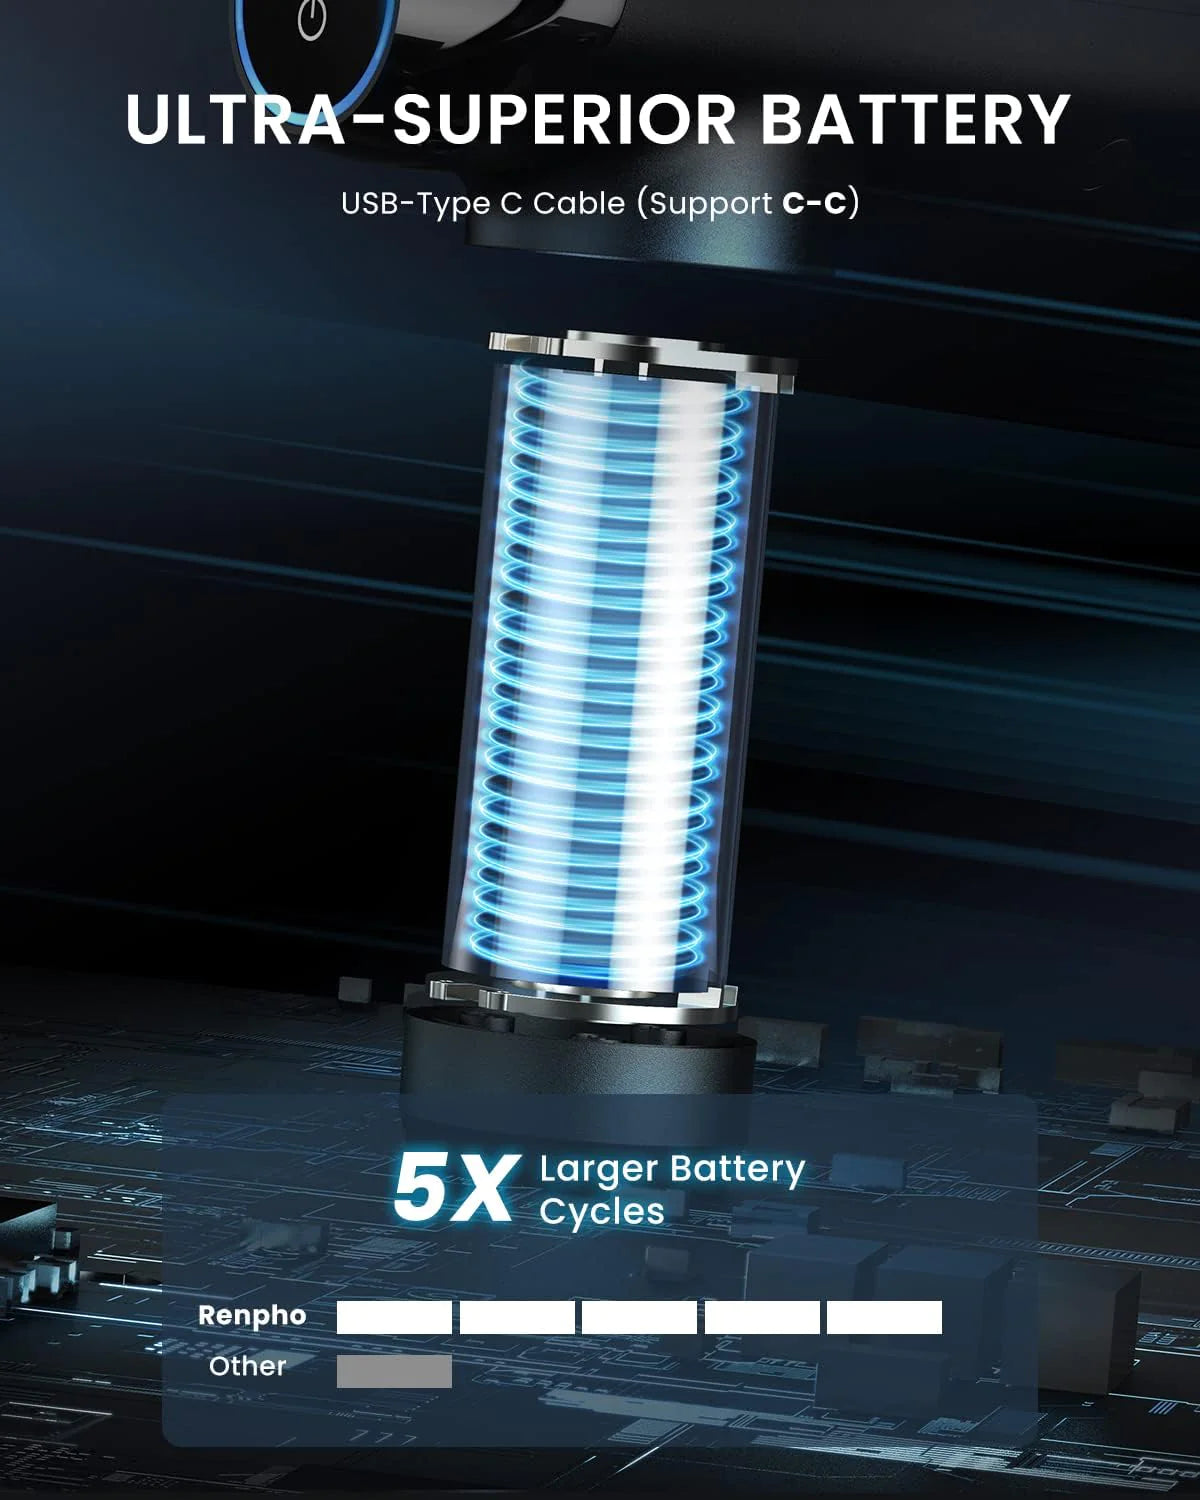 A cylindrical blue-lit superior Power Massage Gun labeled "ultra-superior battery" with "5x larger battery cycles" and usb-type c compatibility, displayed over a tech-themed background.